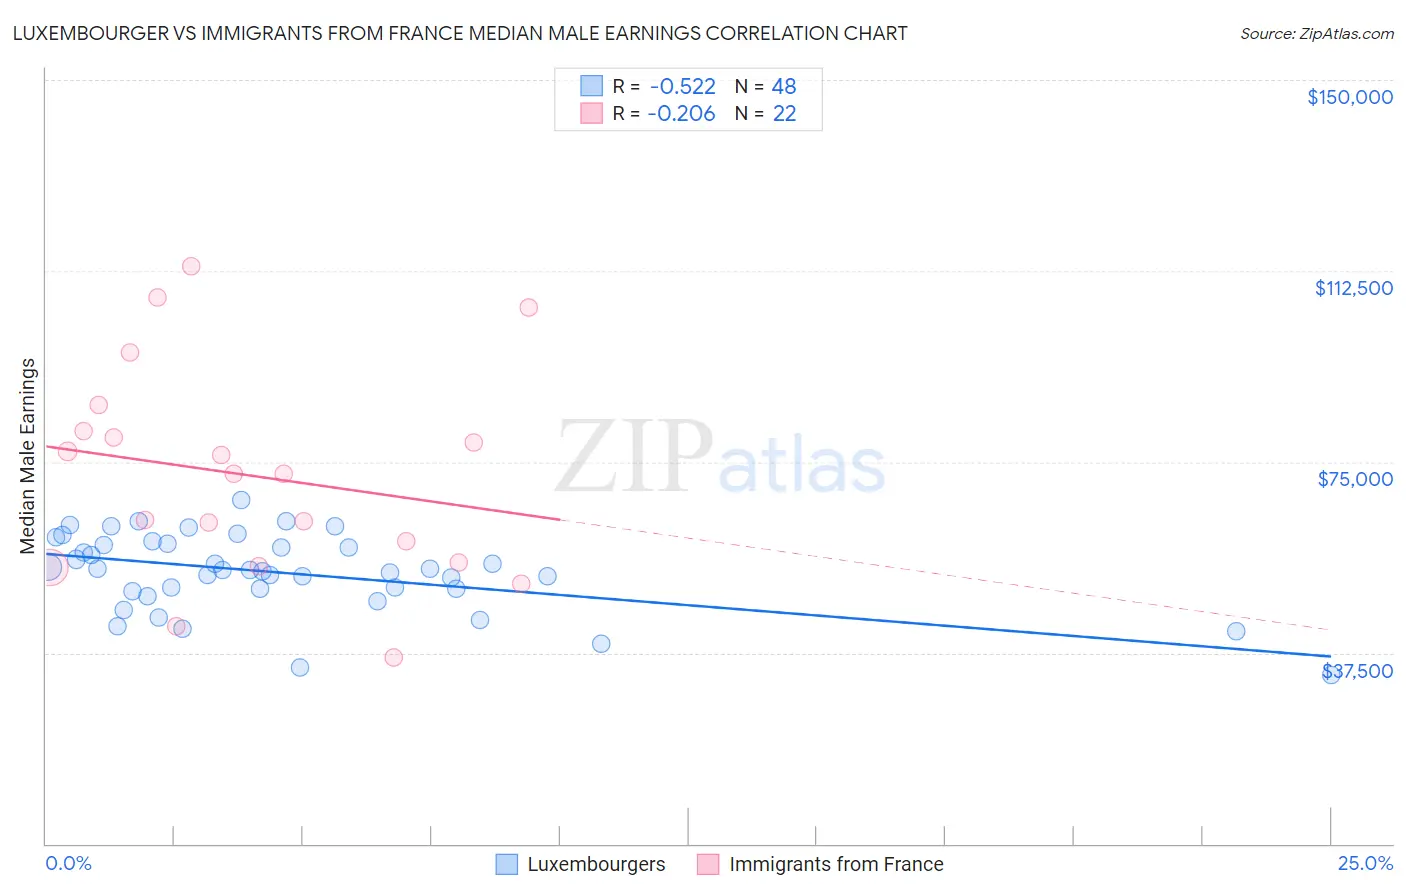 Luxembourger vs Immigrants from France Median Male Earnings